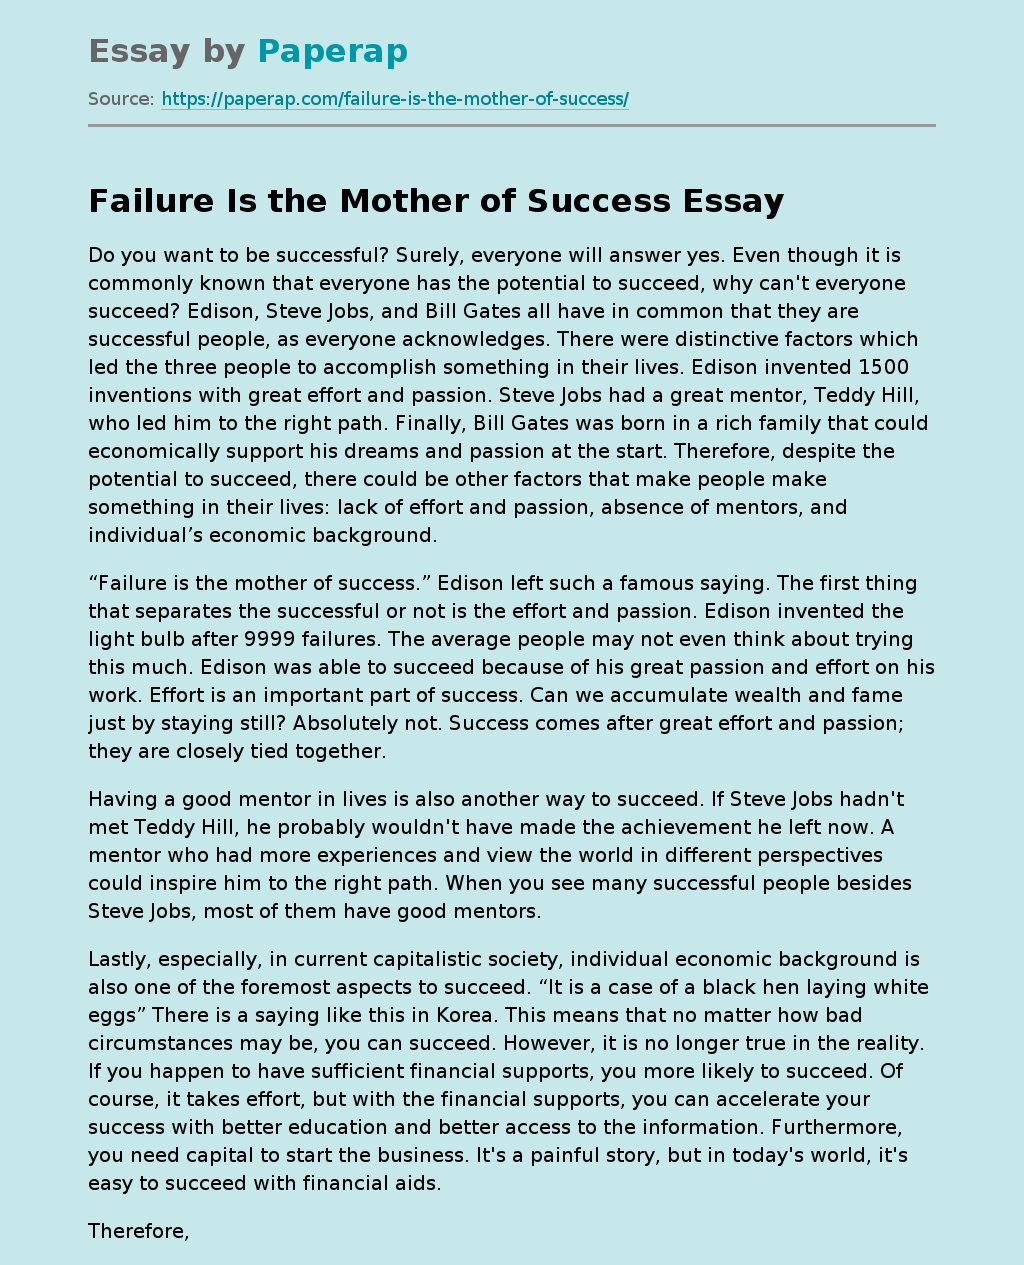 Failure Is the Mother of Success